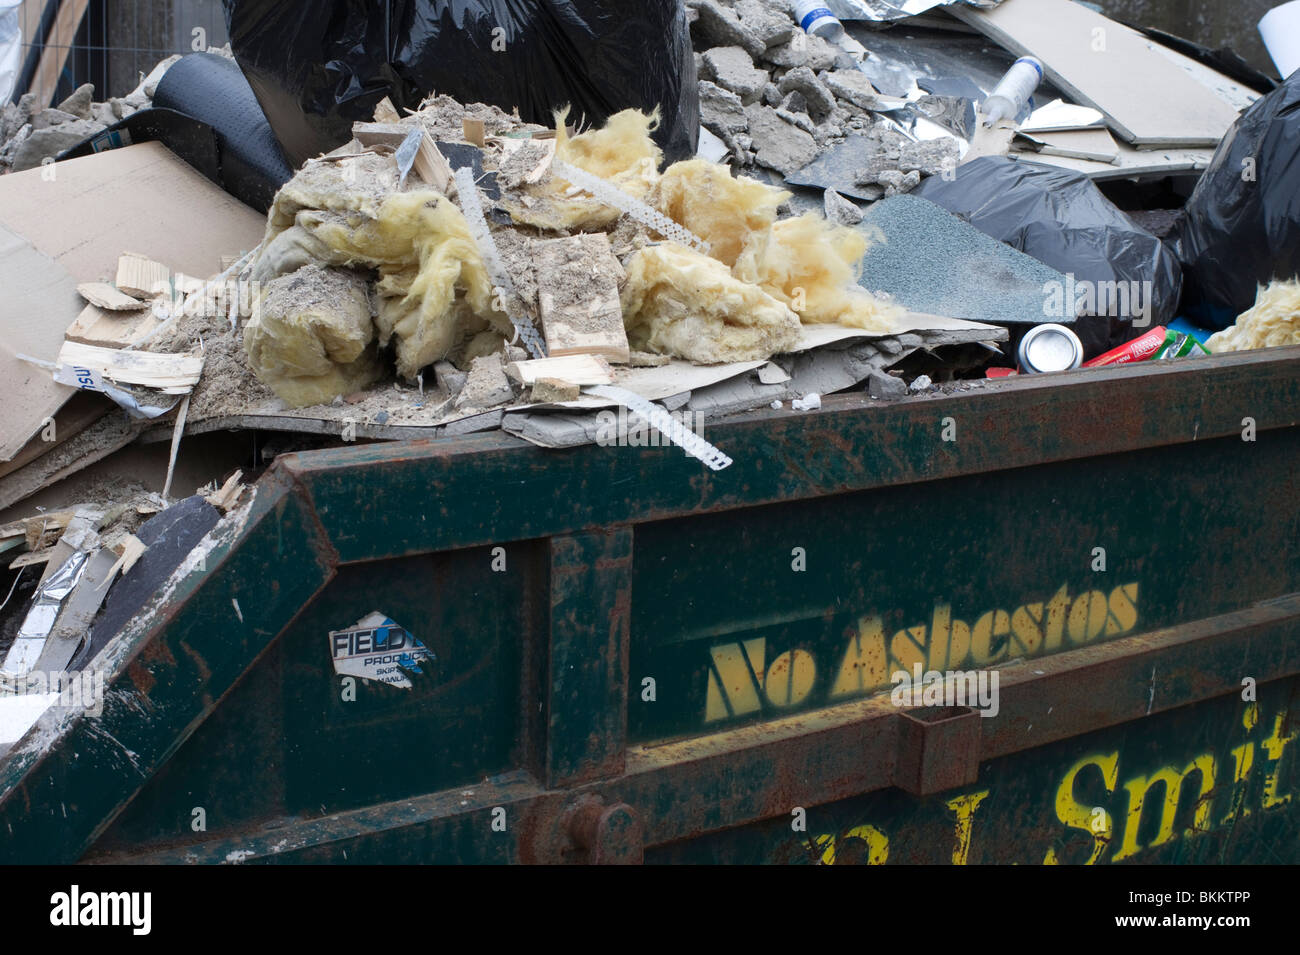 Building work waste in a skip awaiting removal, with NO ASBESTOS sign on the skip - UK Europe Stock Photo